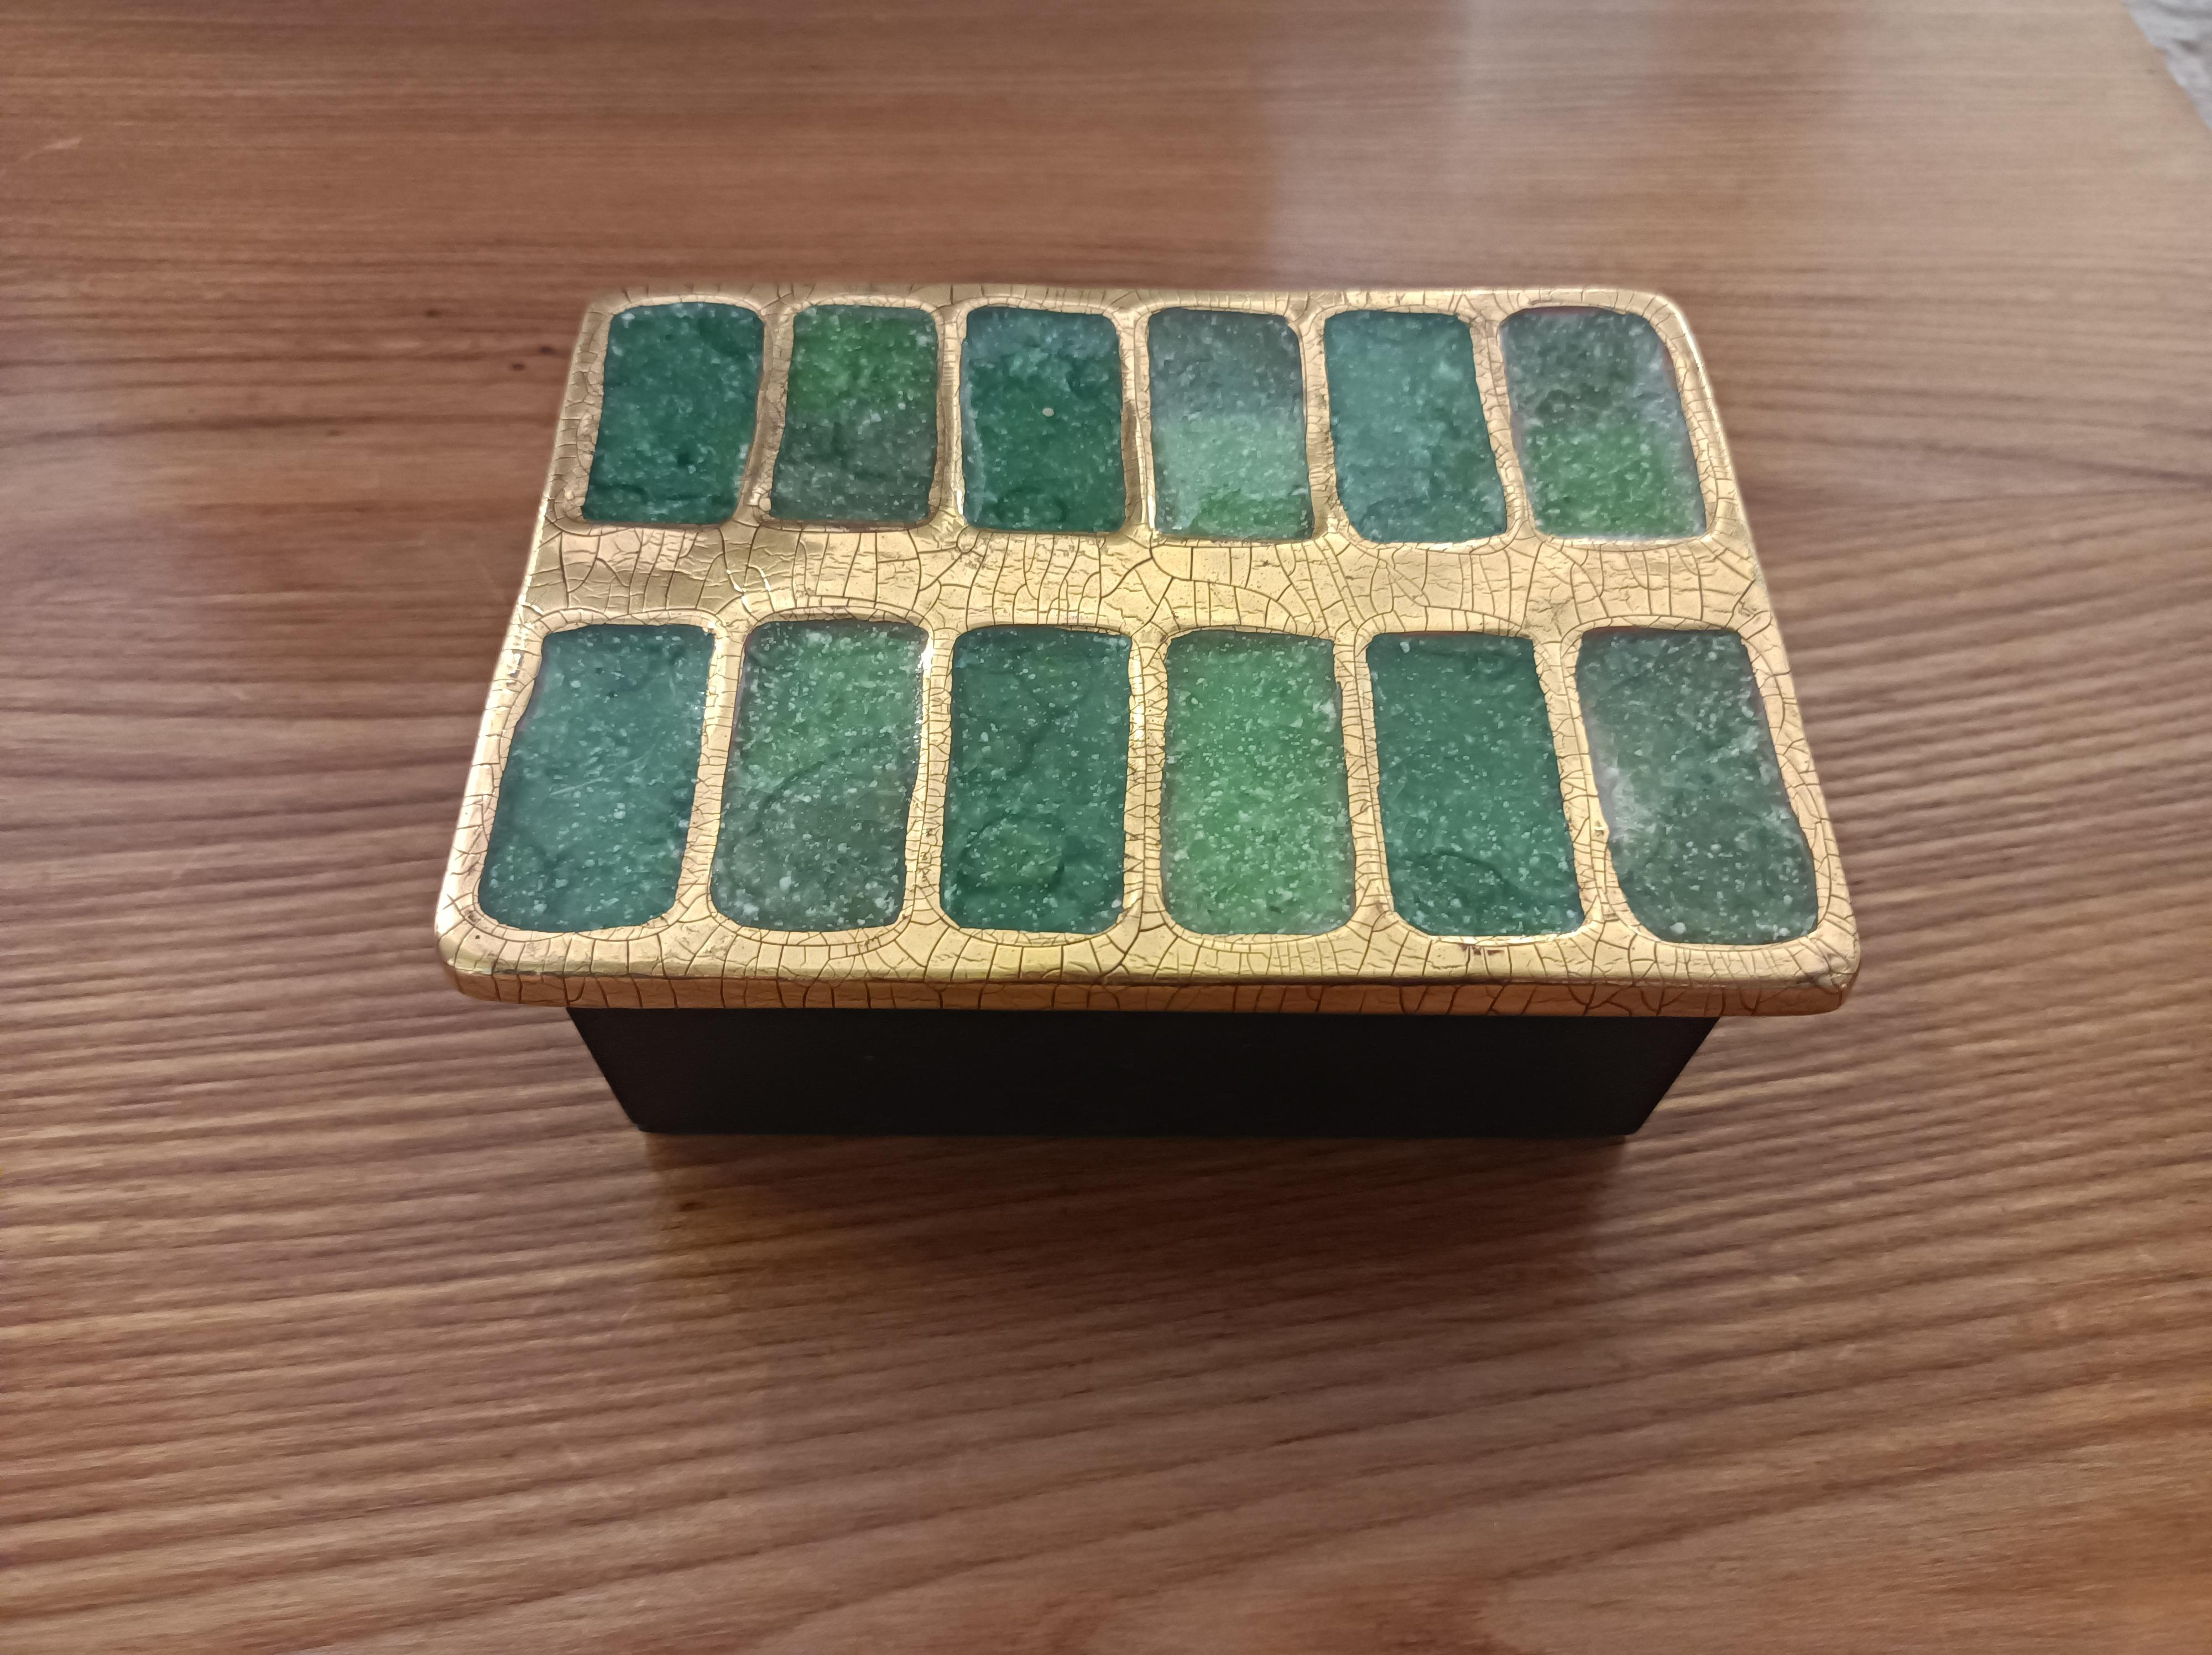 A rectangular chest embossed earthenware with crystallised green glass.
Crackled gold frame.
Wooden base with green felt at the back.
France,
Circa 1956


Dimensions : 

Height ( max) : 6 cm / 2,36 inch
Lenght : 15 / 5,90 inch
Width : 11